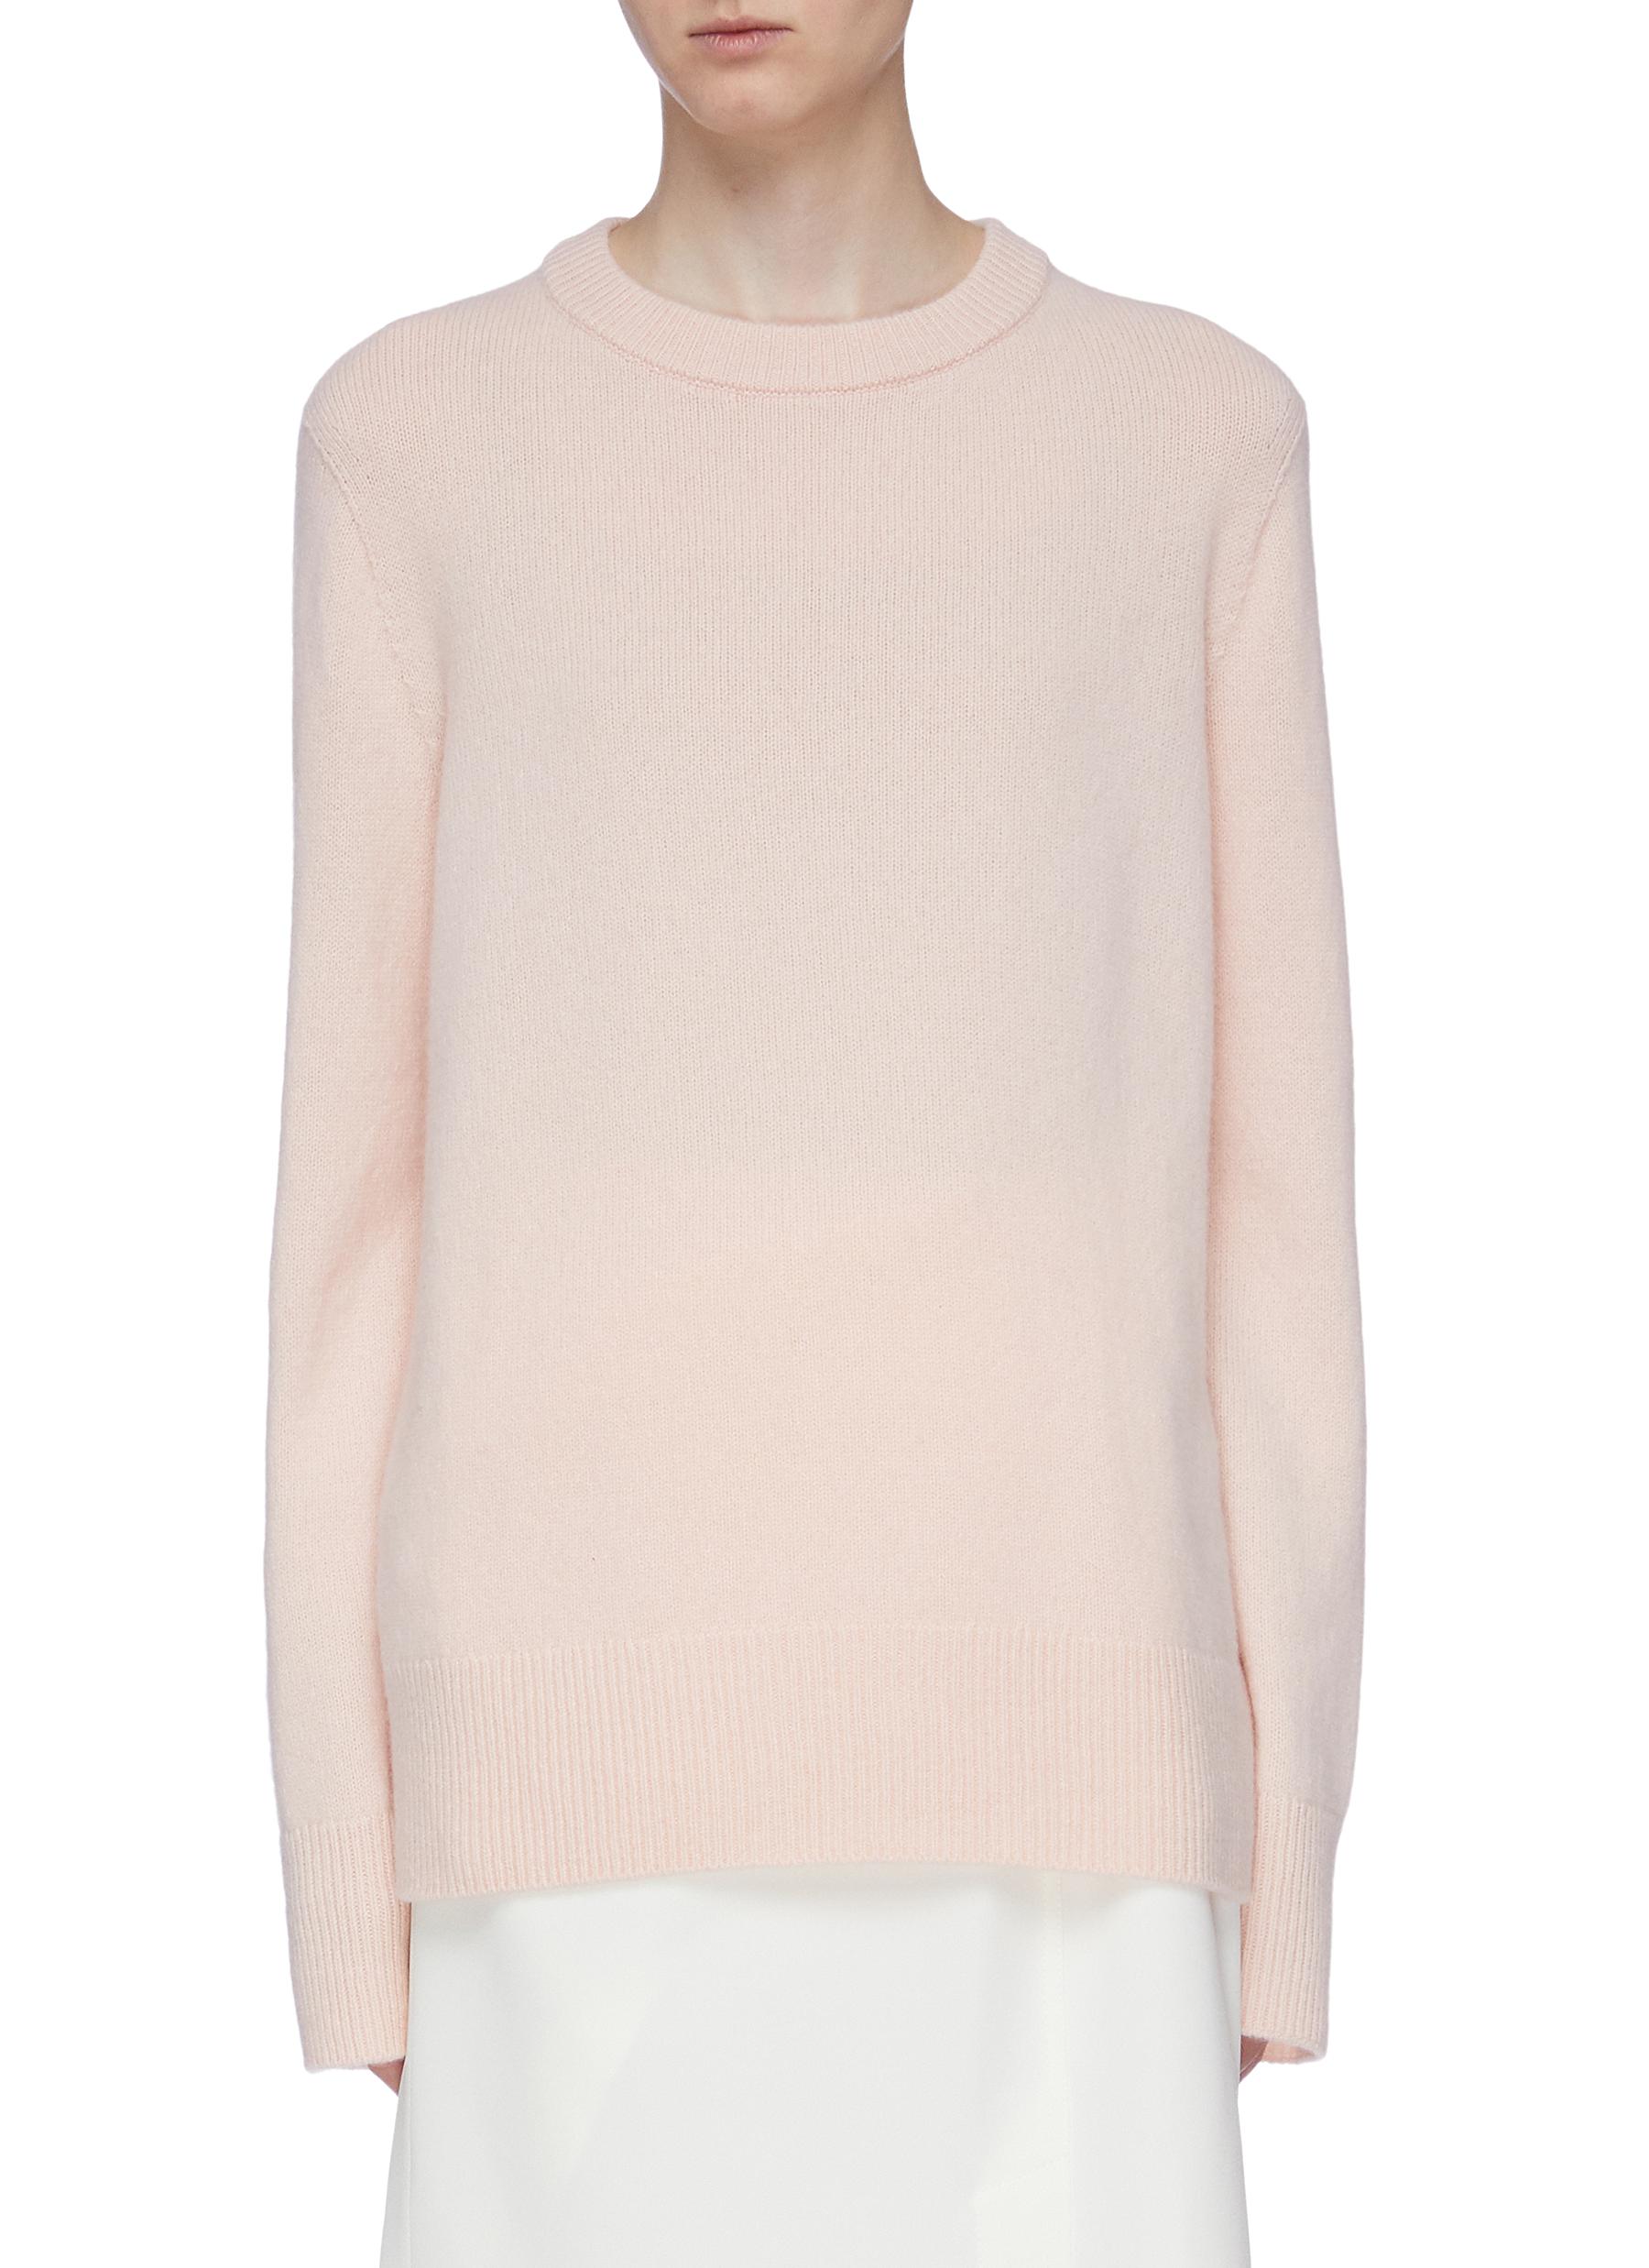 Sibina wool-cashmere sweater by The Row